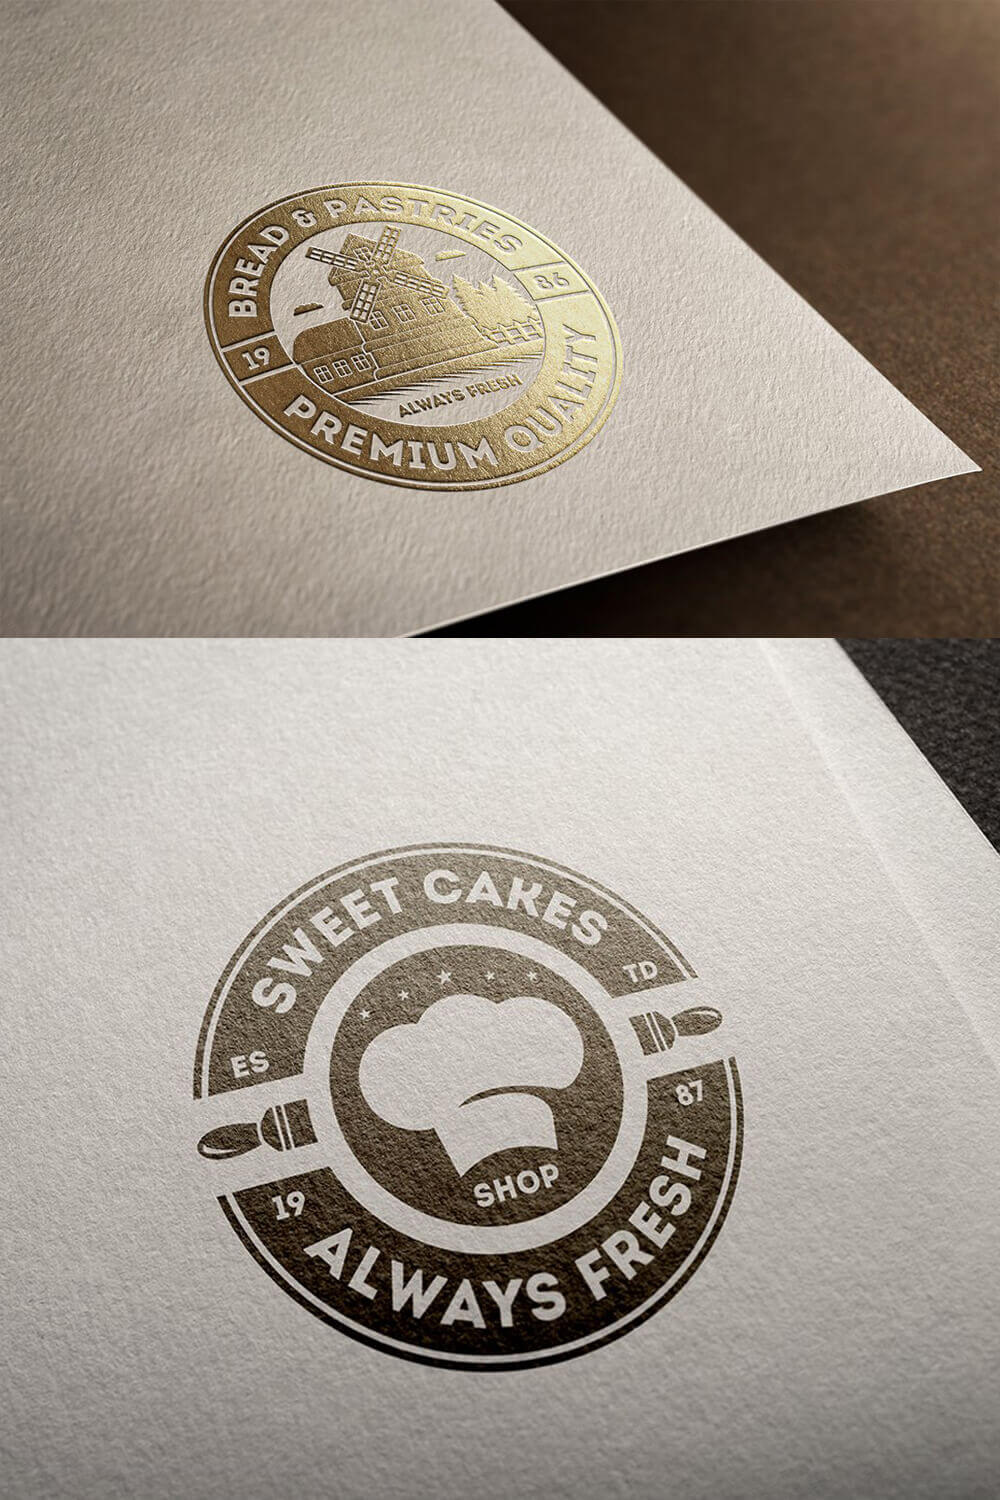 Gold "Bread & Pastries" logo on brown paper, brown "Sweet Cakes" logo on white paper.